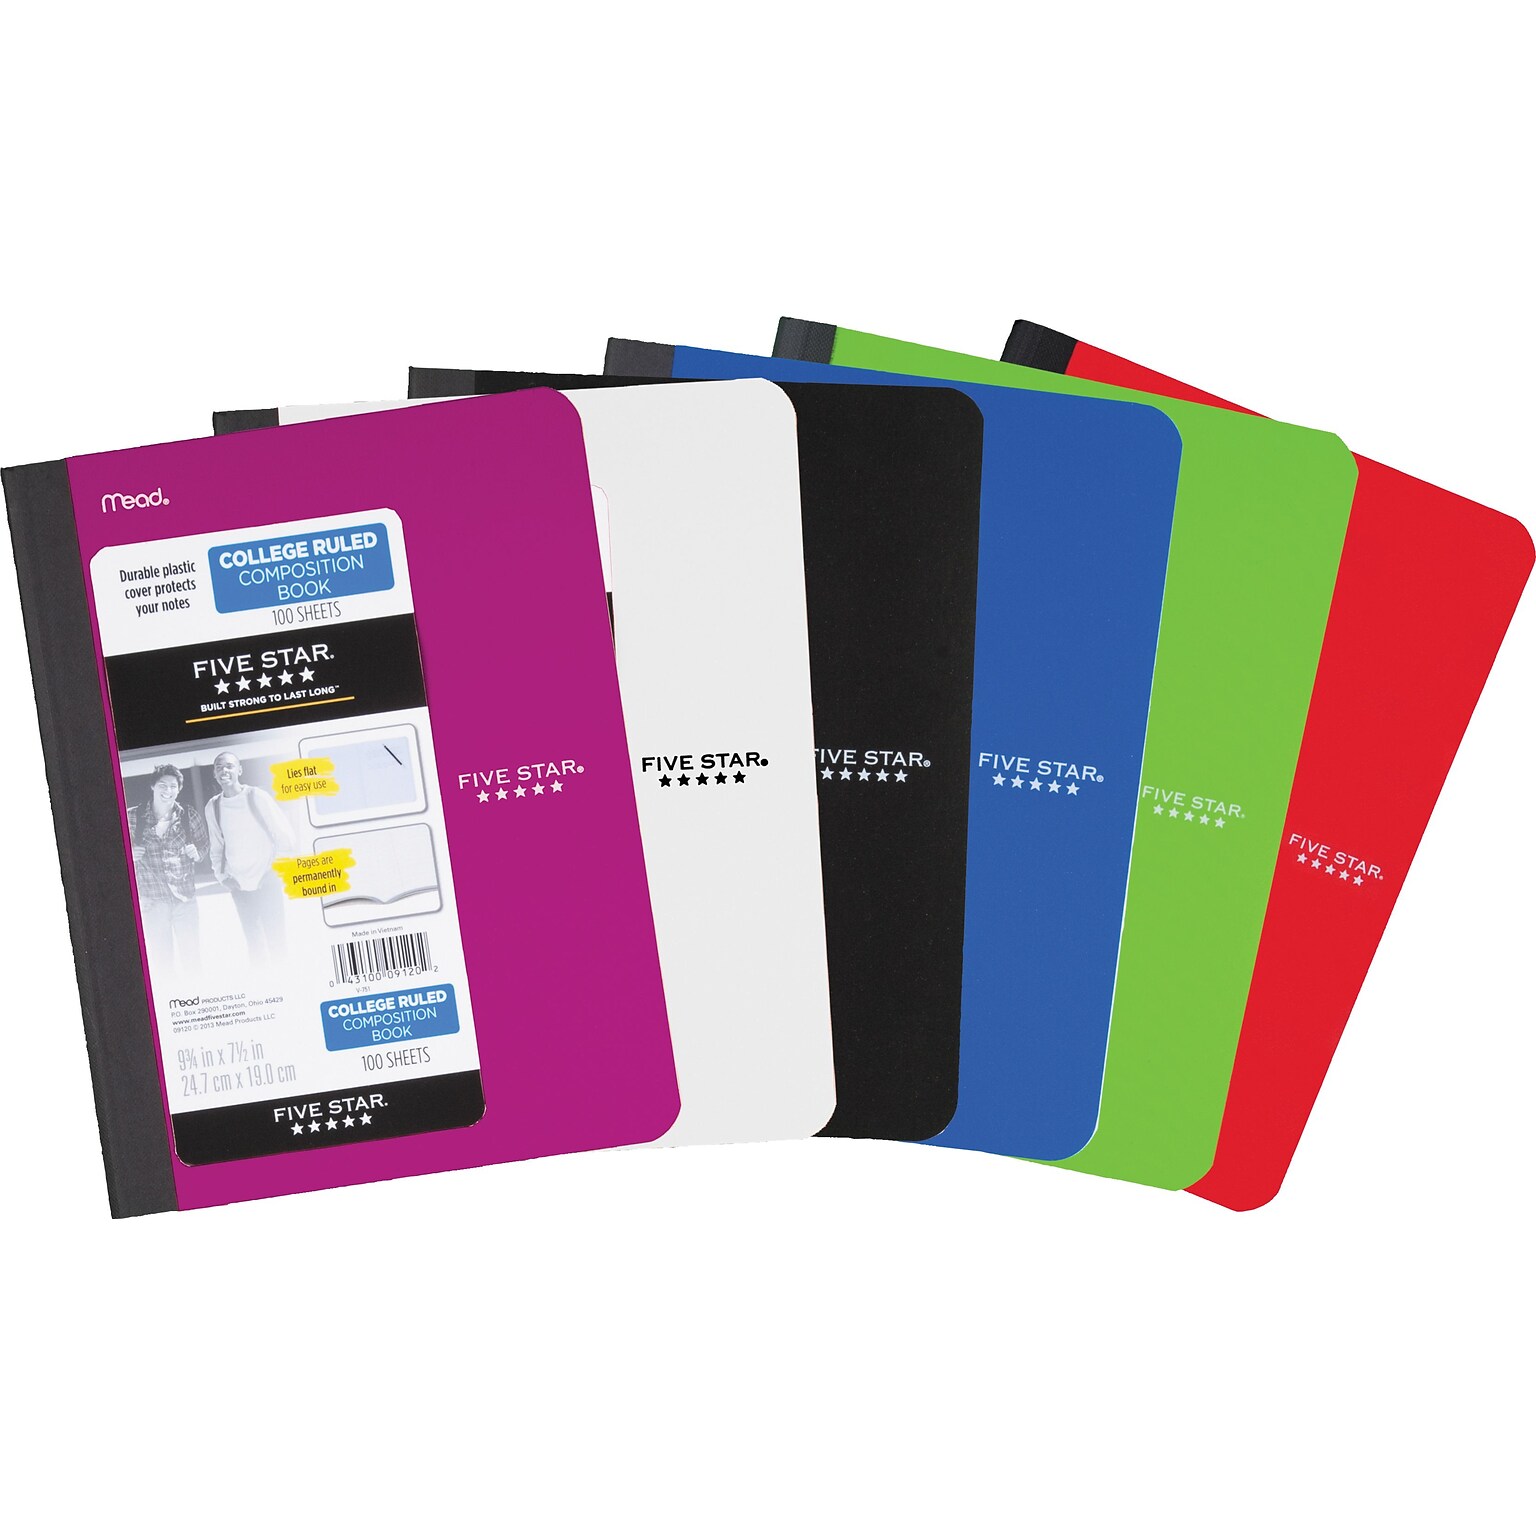 Five Star Composition Notebooks, 7.5 x 9.7, College Ruled, 100 Sheets, Each (9120)